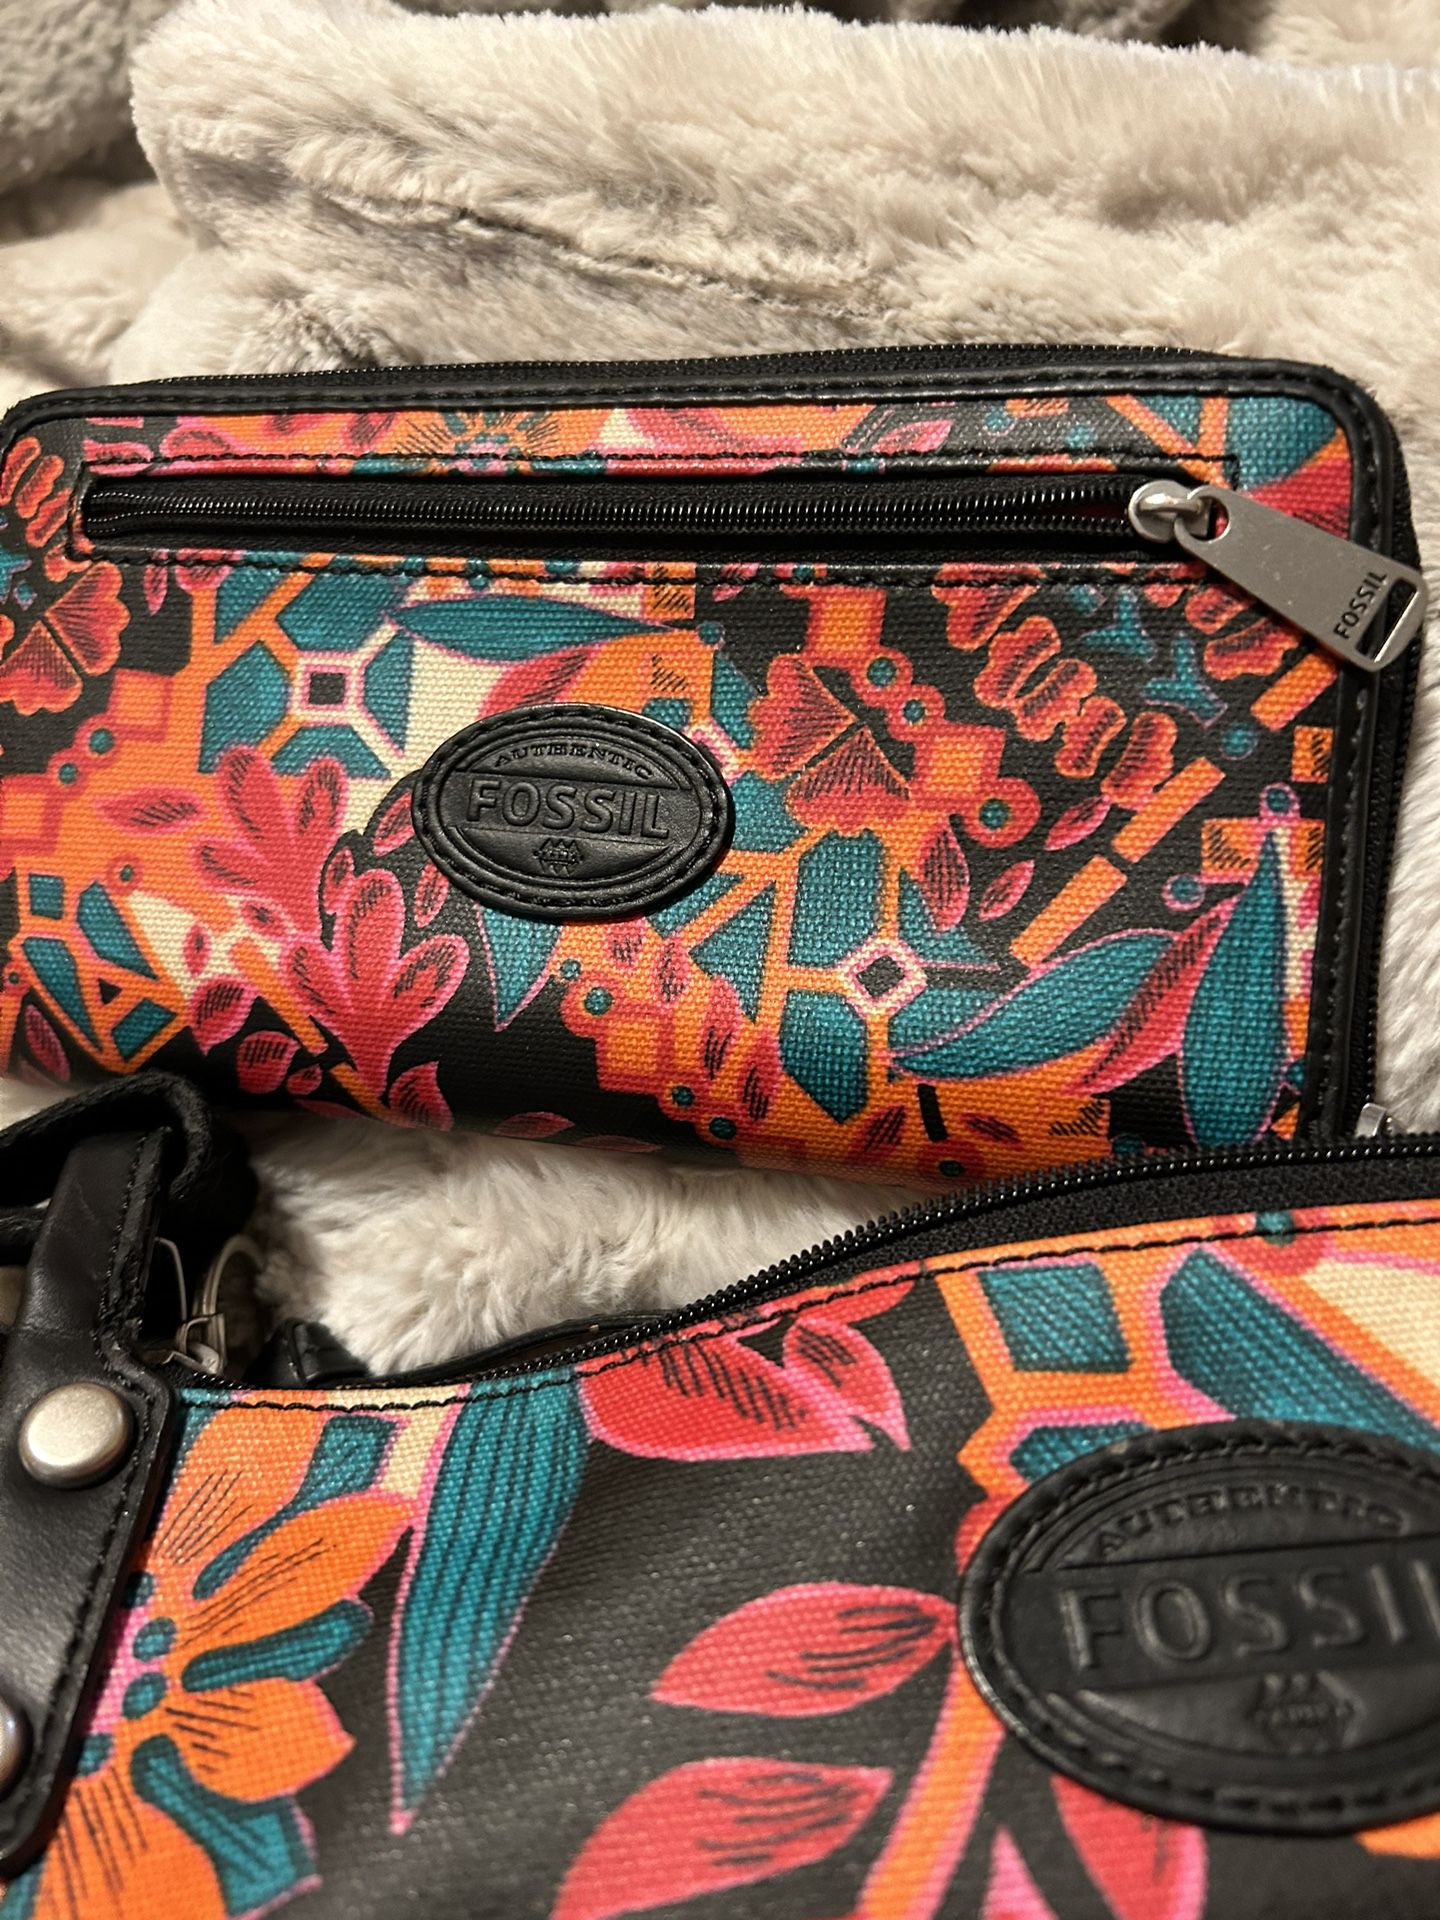 Fossil Purse And Matching Wallet